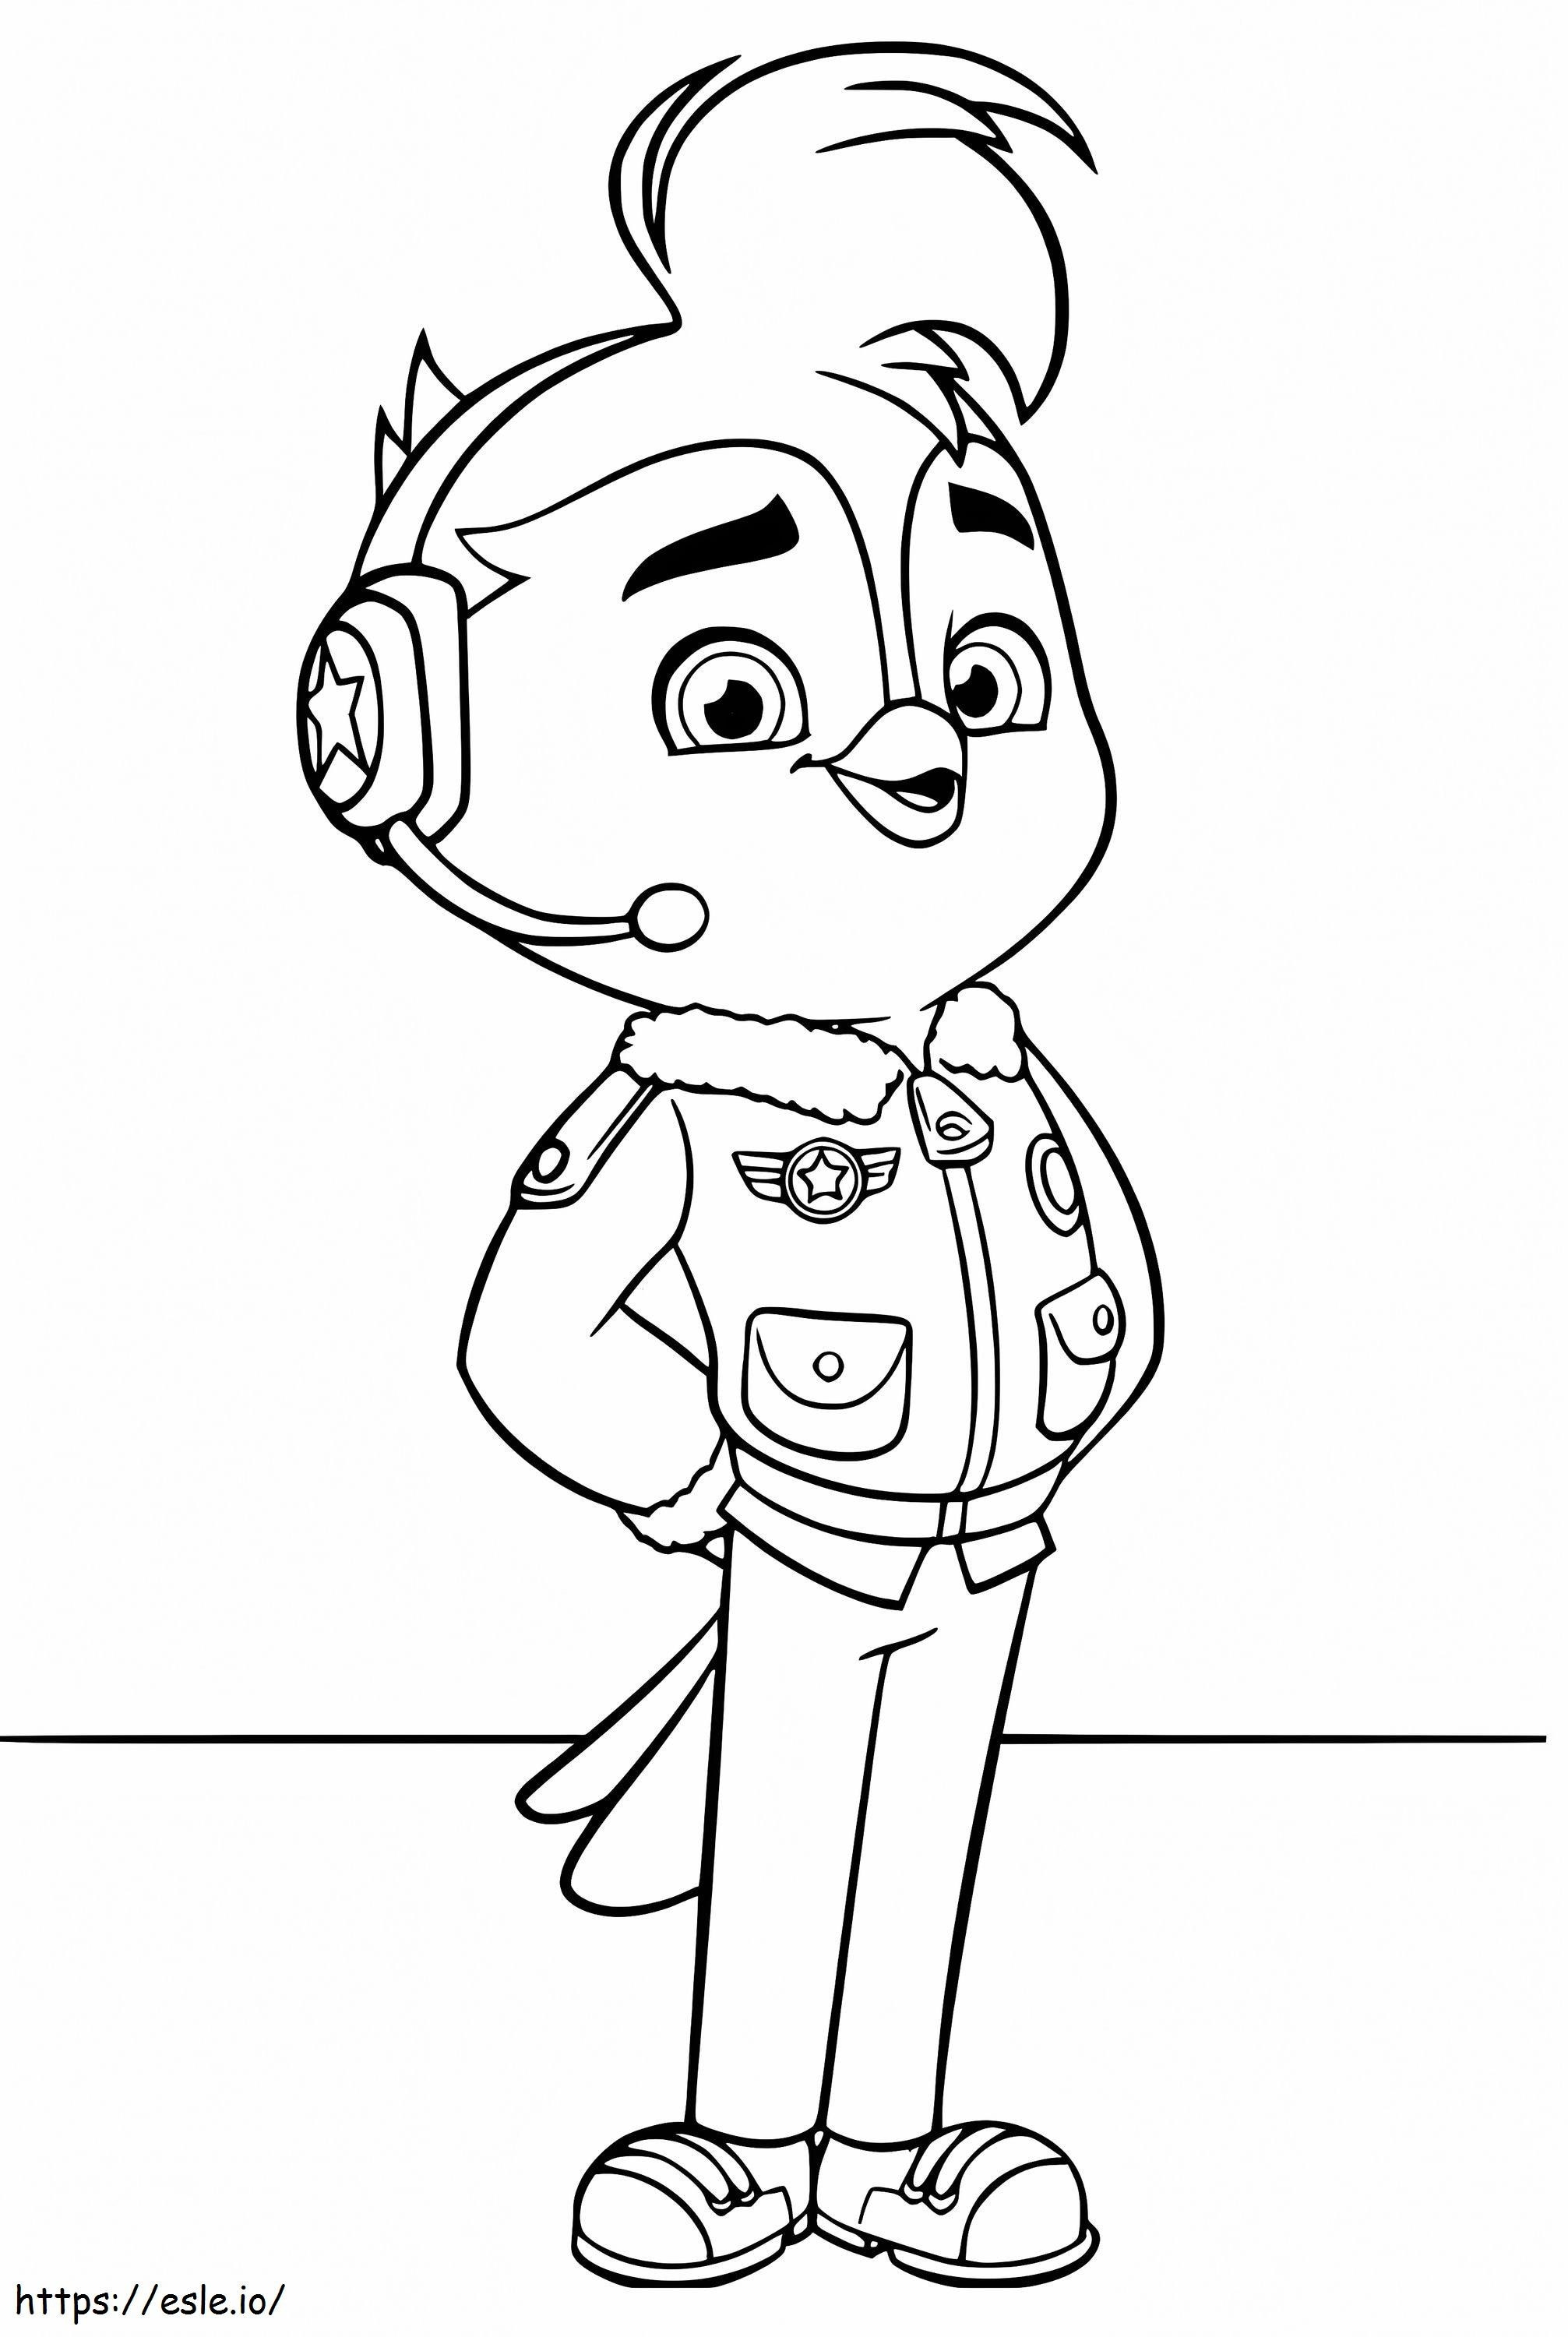 Speedy From Top Wing coloring page